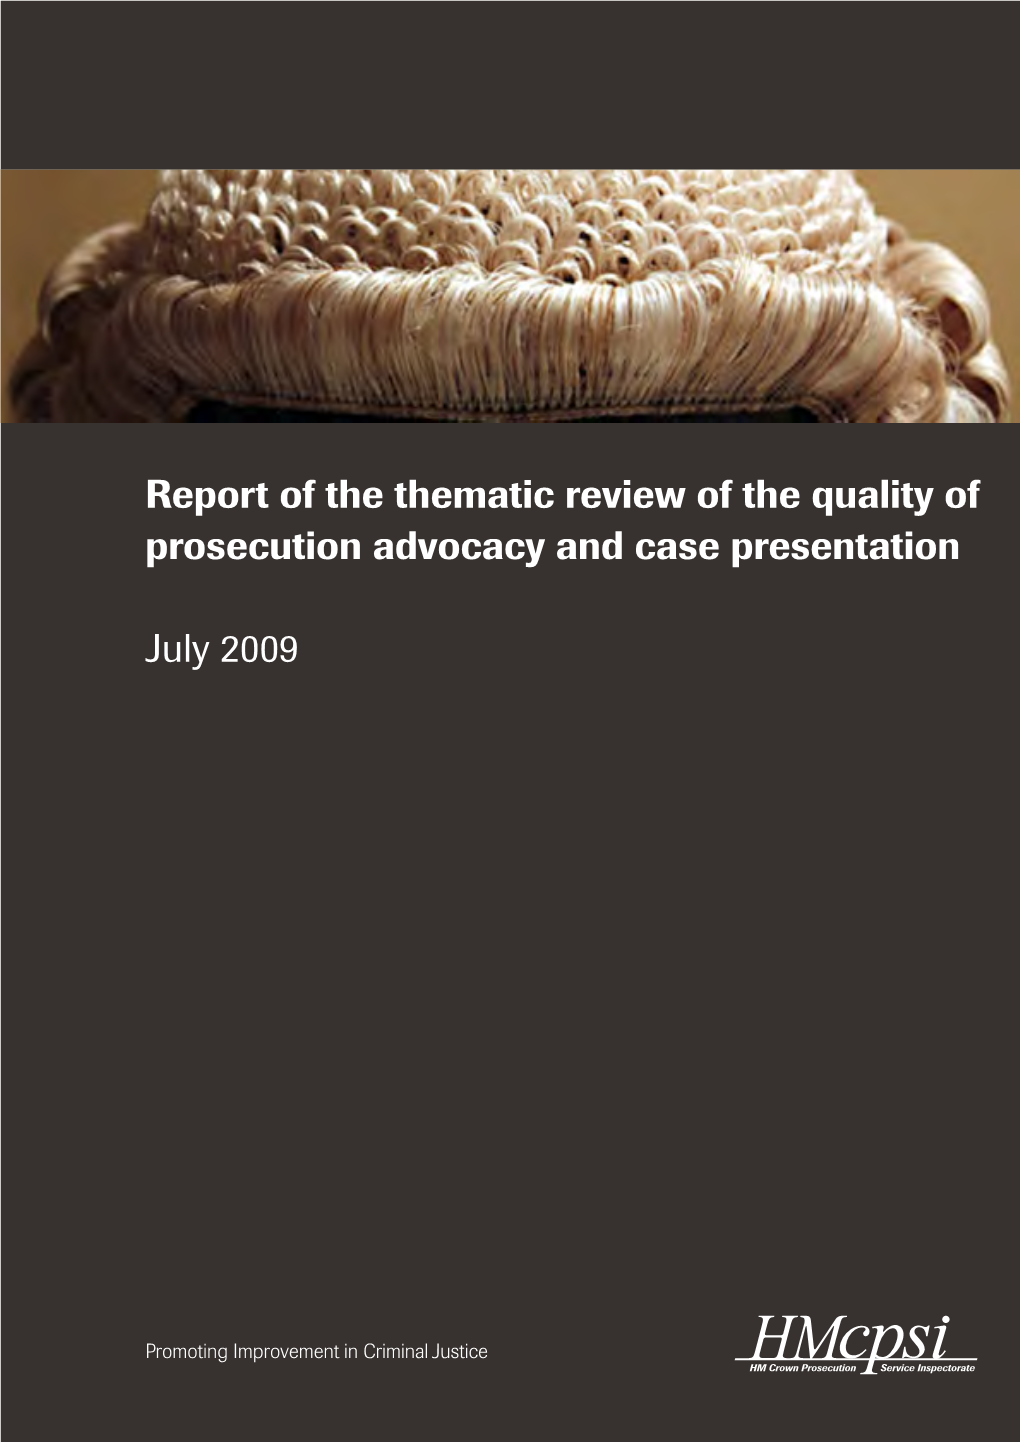 Report of the Thematic Review of the Quality of Prosecution Advocacy and Case Presentation